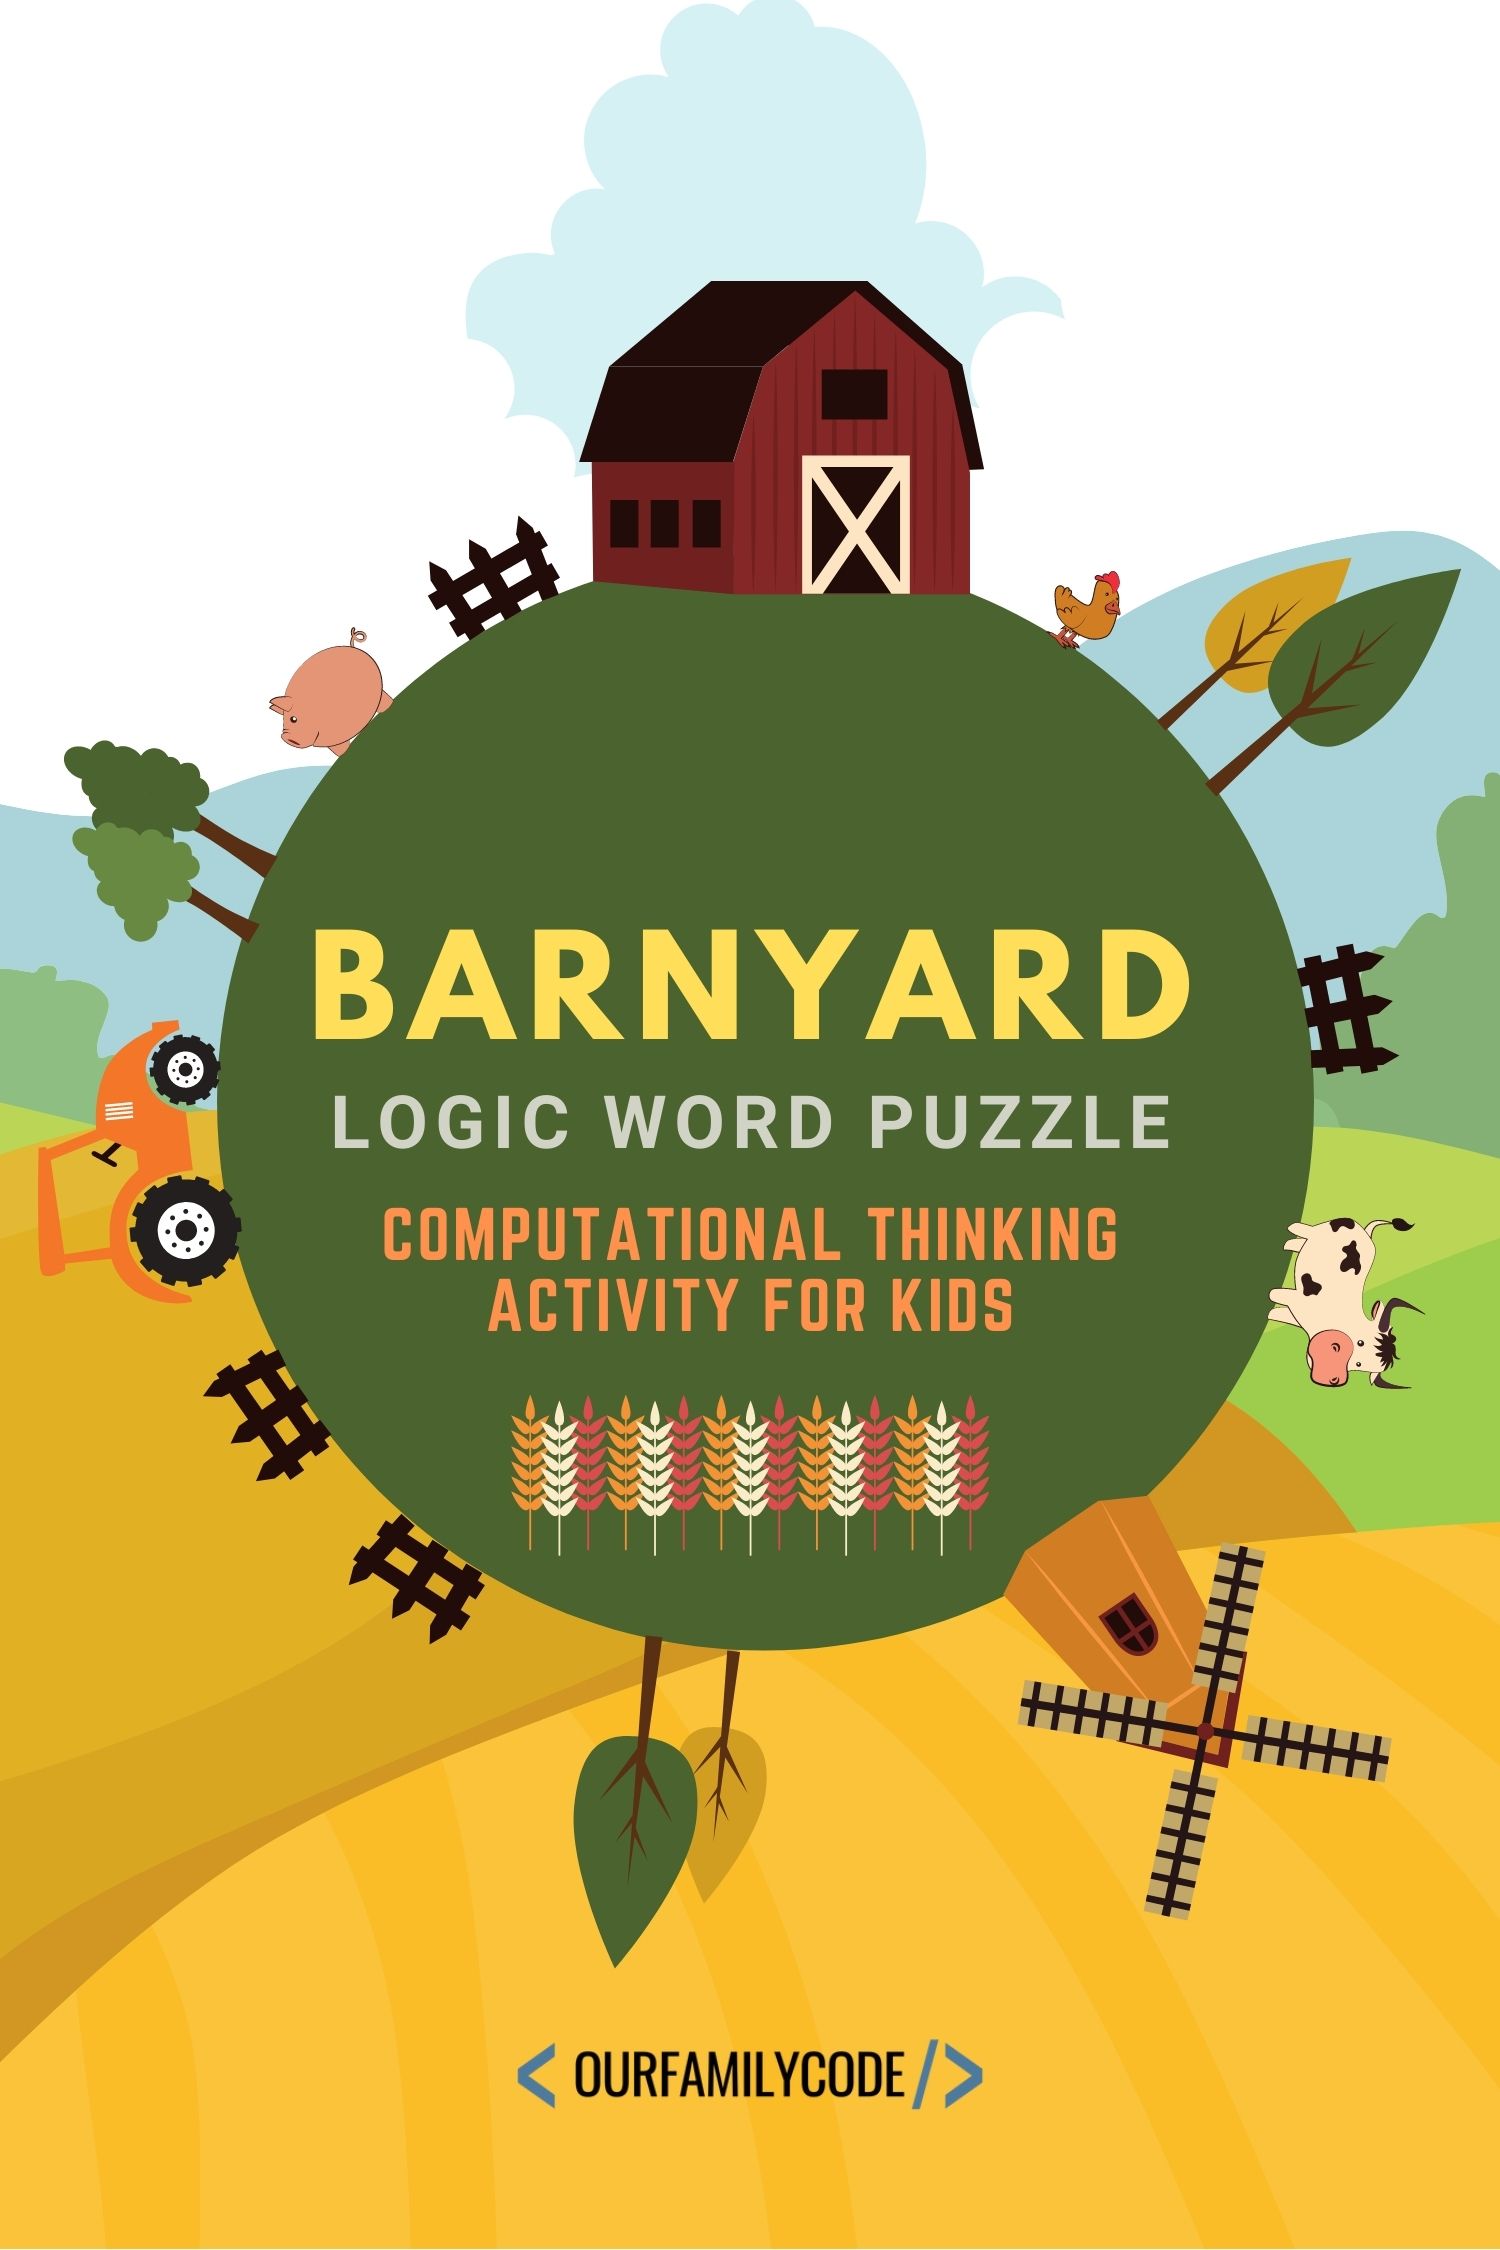 This barnyard logic word puzzle activity is a way for kids to use logical thinking and pattern matching paired with spatial recognition and spelling. #teachkidstocode #logicpuzzles